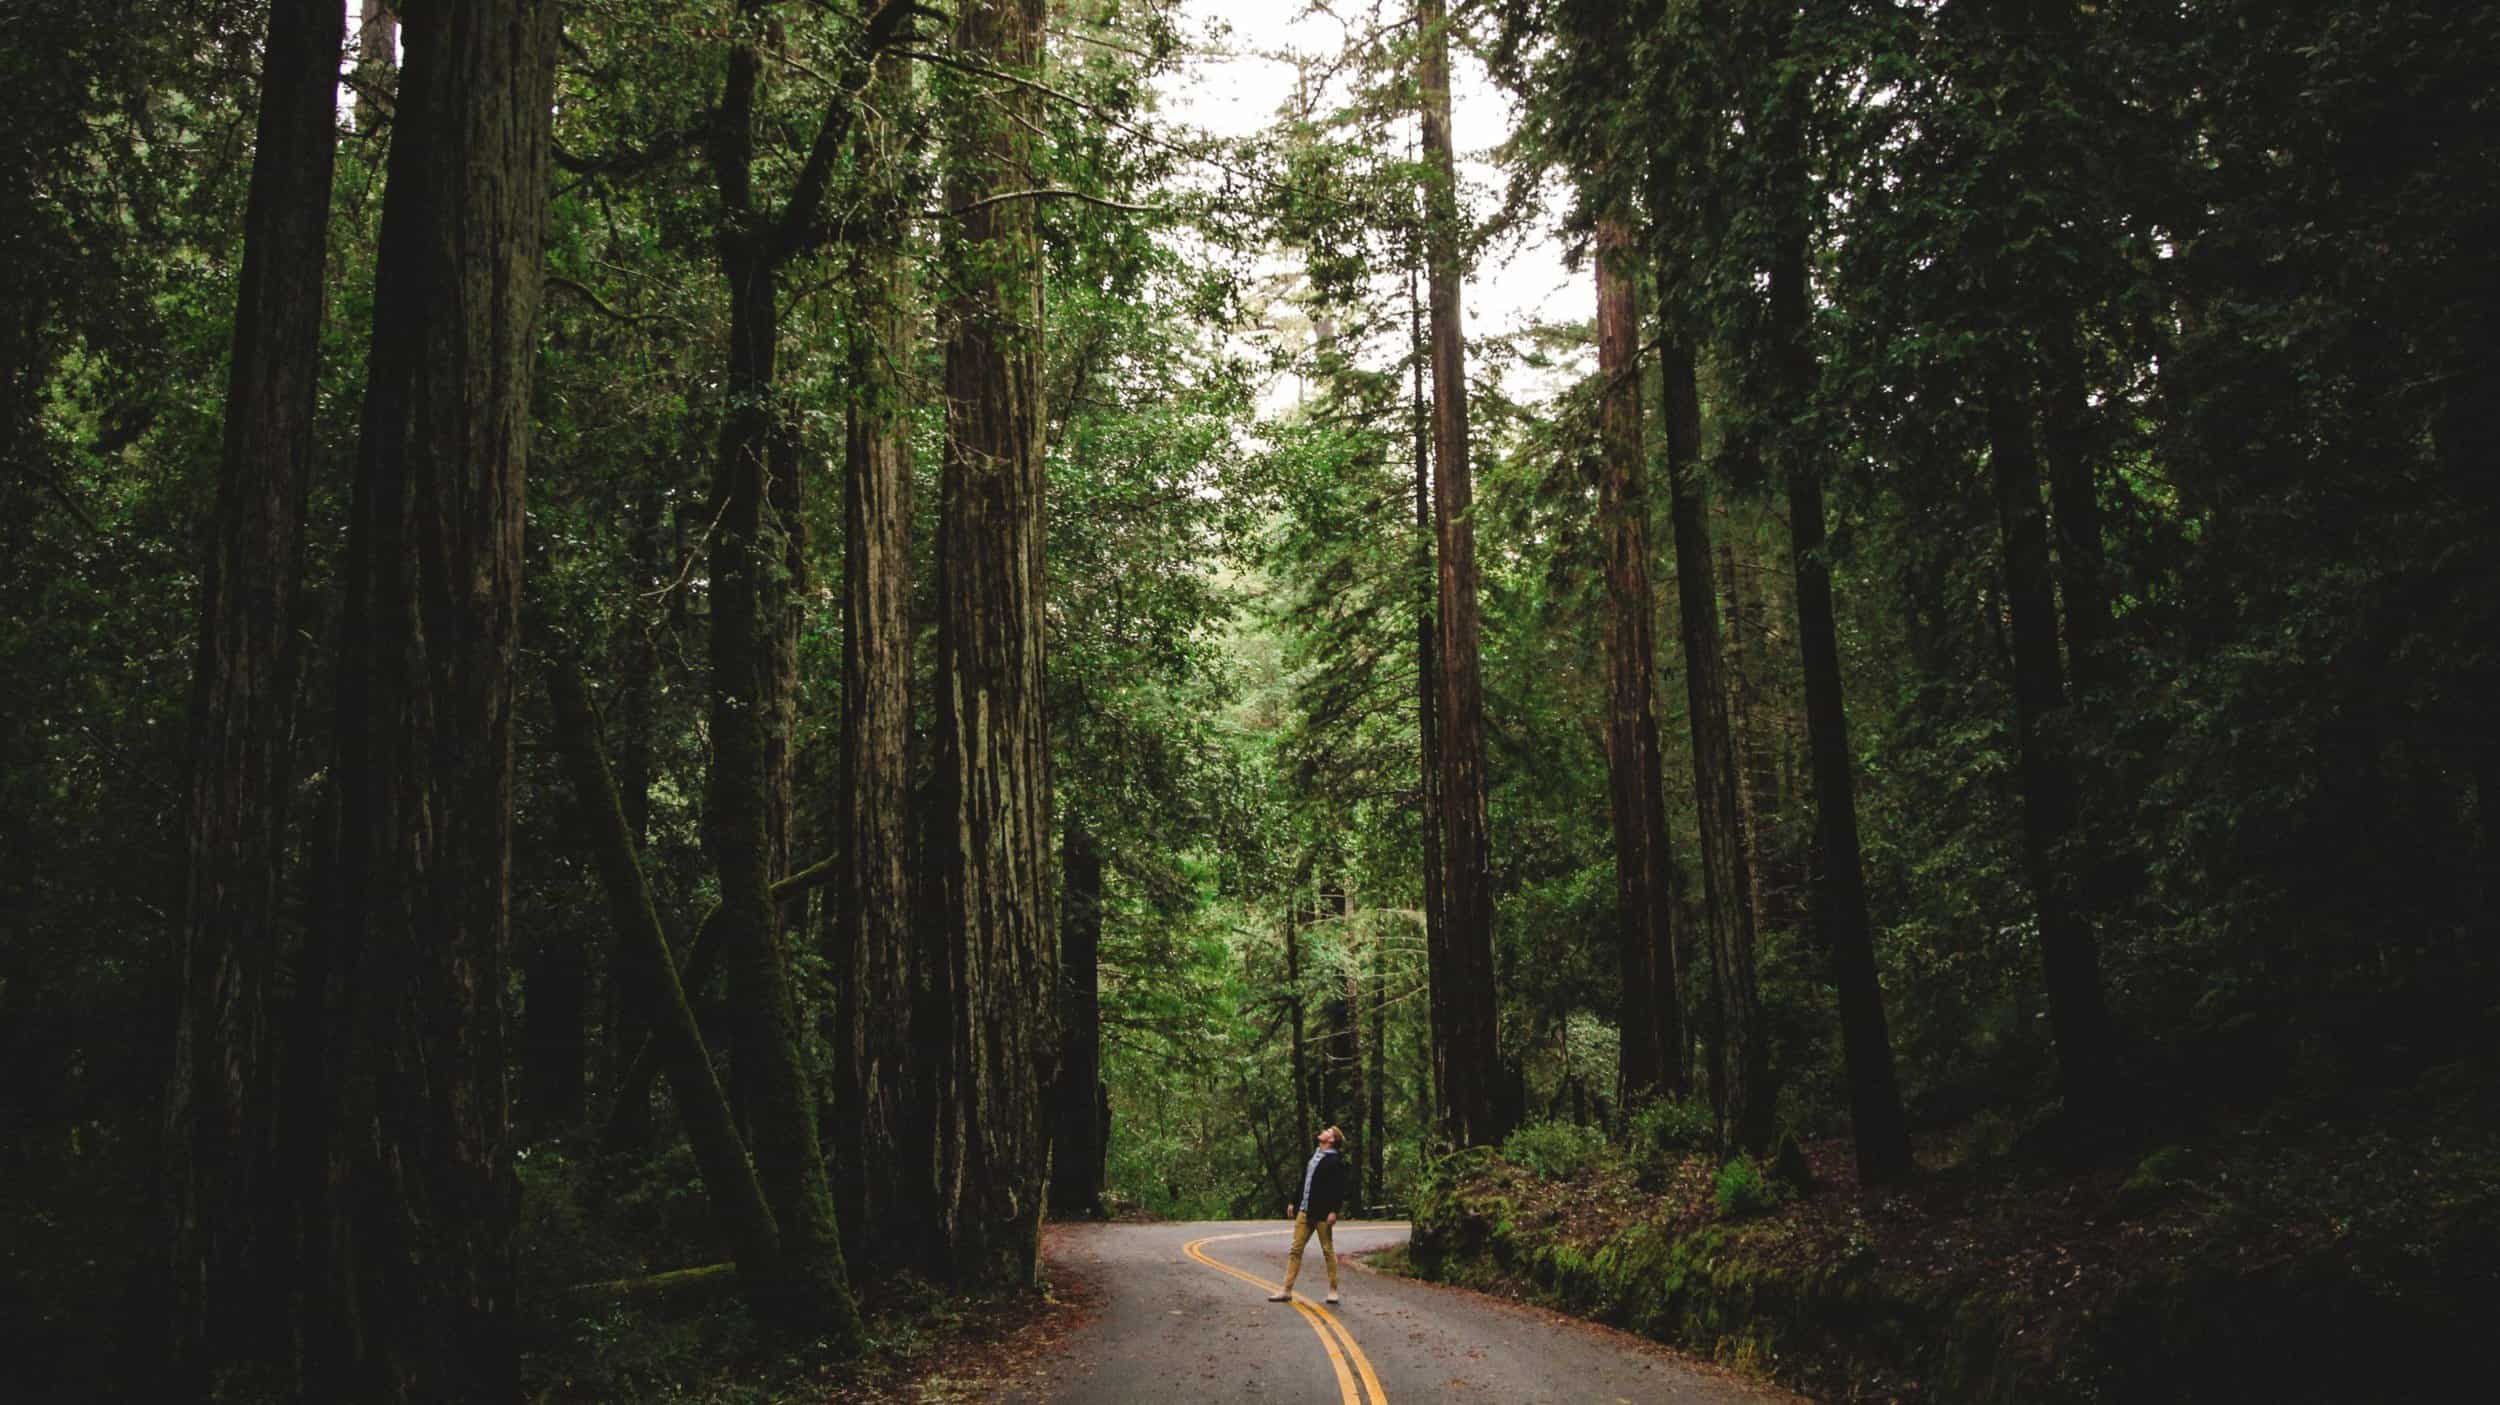 person stands in road with redwood trees towering above